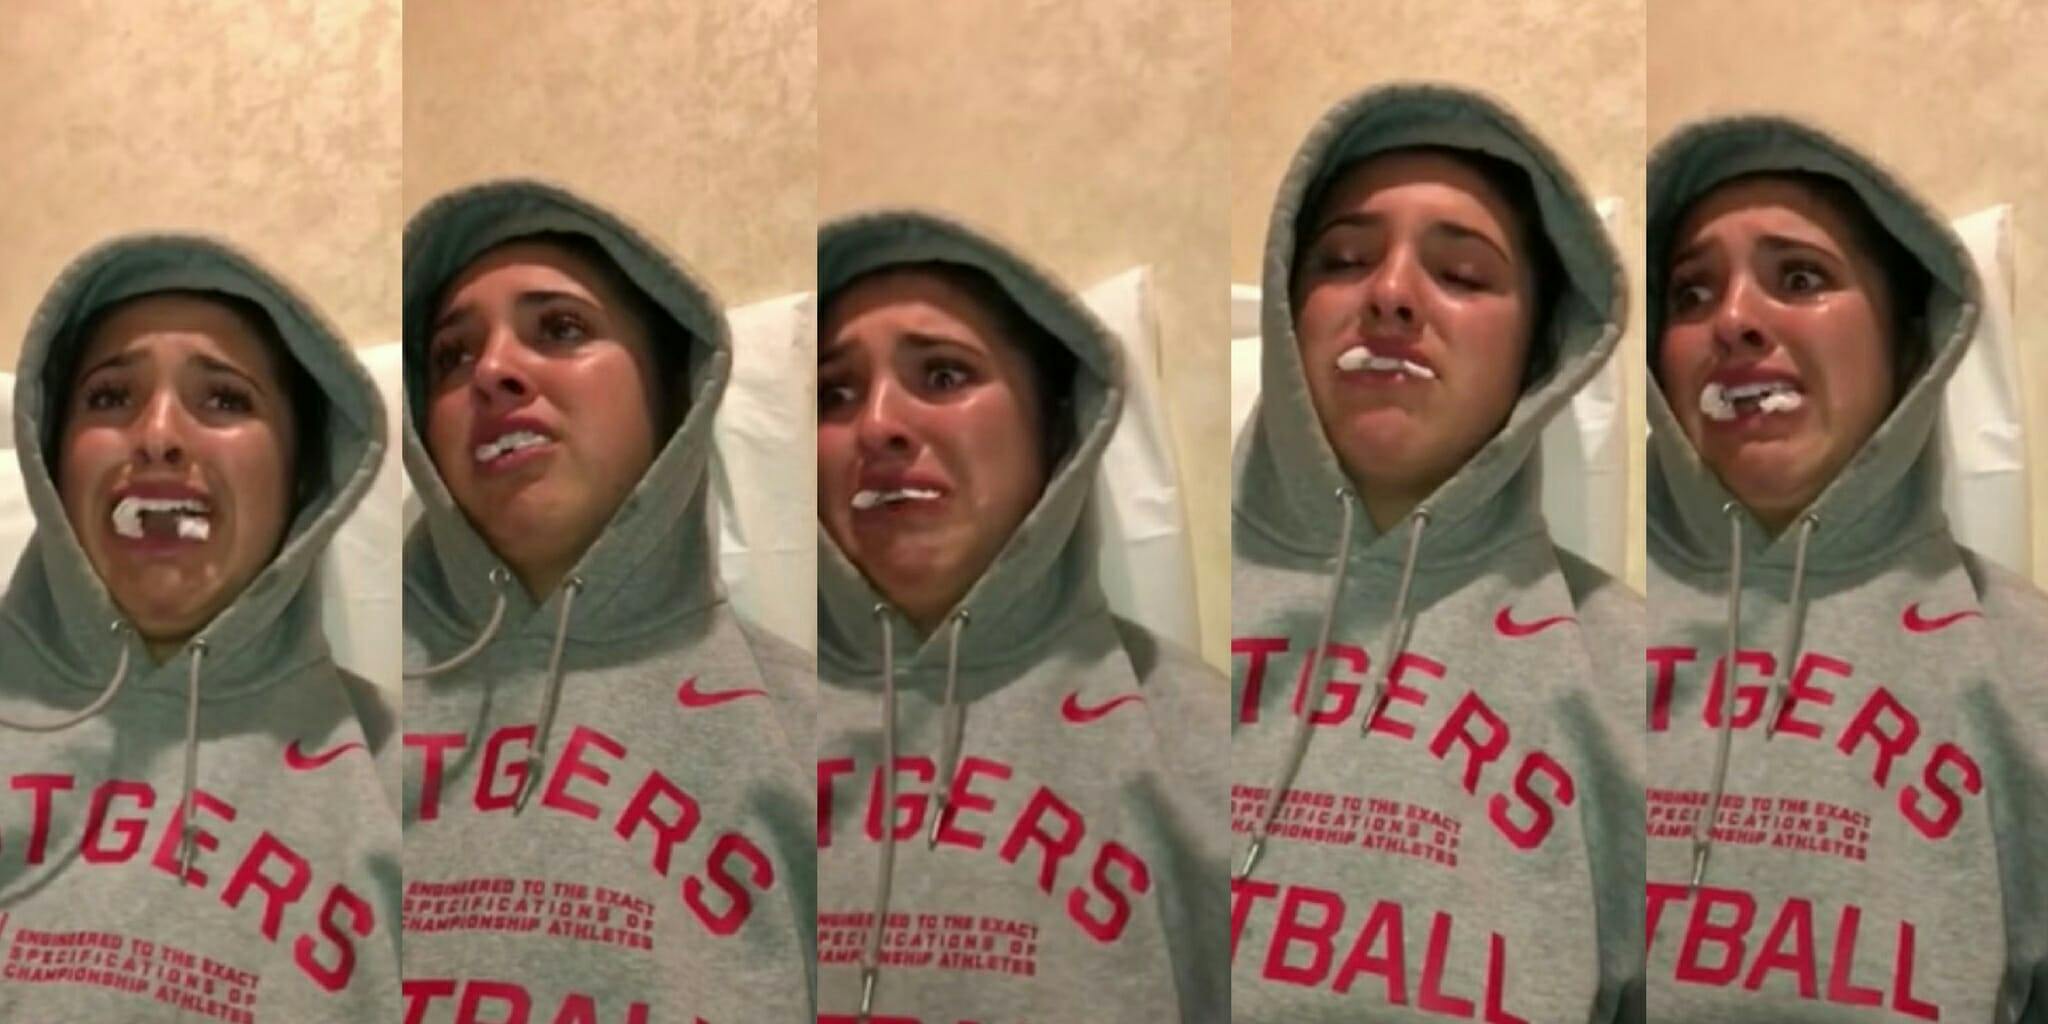 Haley talks about 'missing' the Super Bowl after getting her wisdom teeth removed.